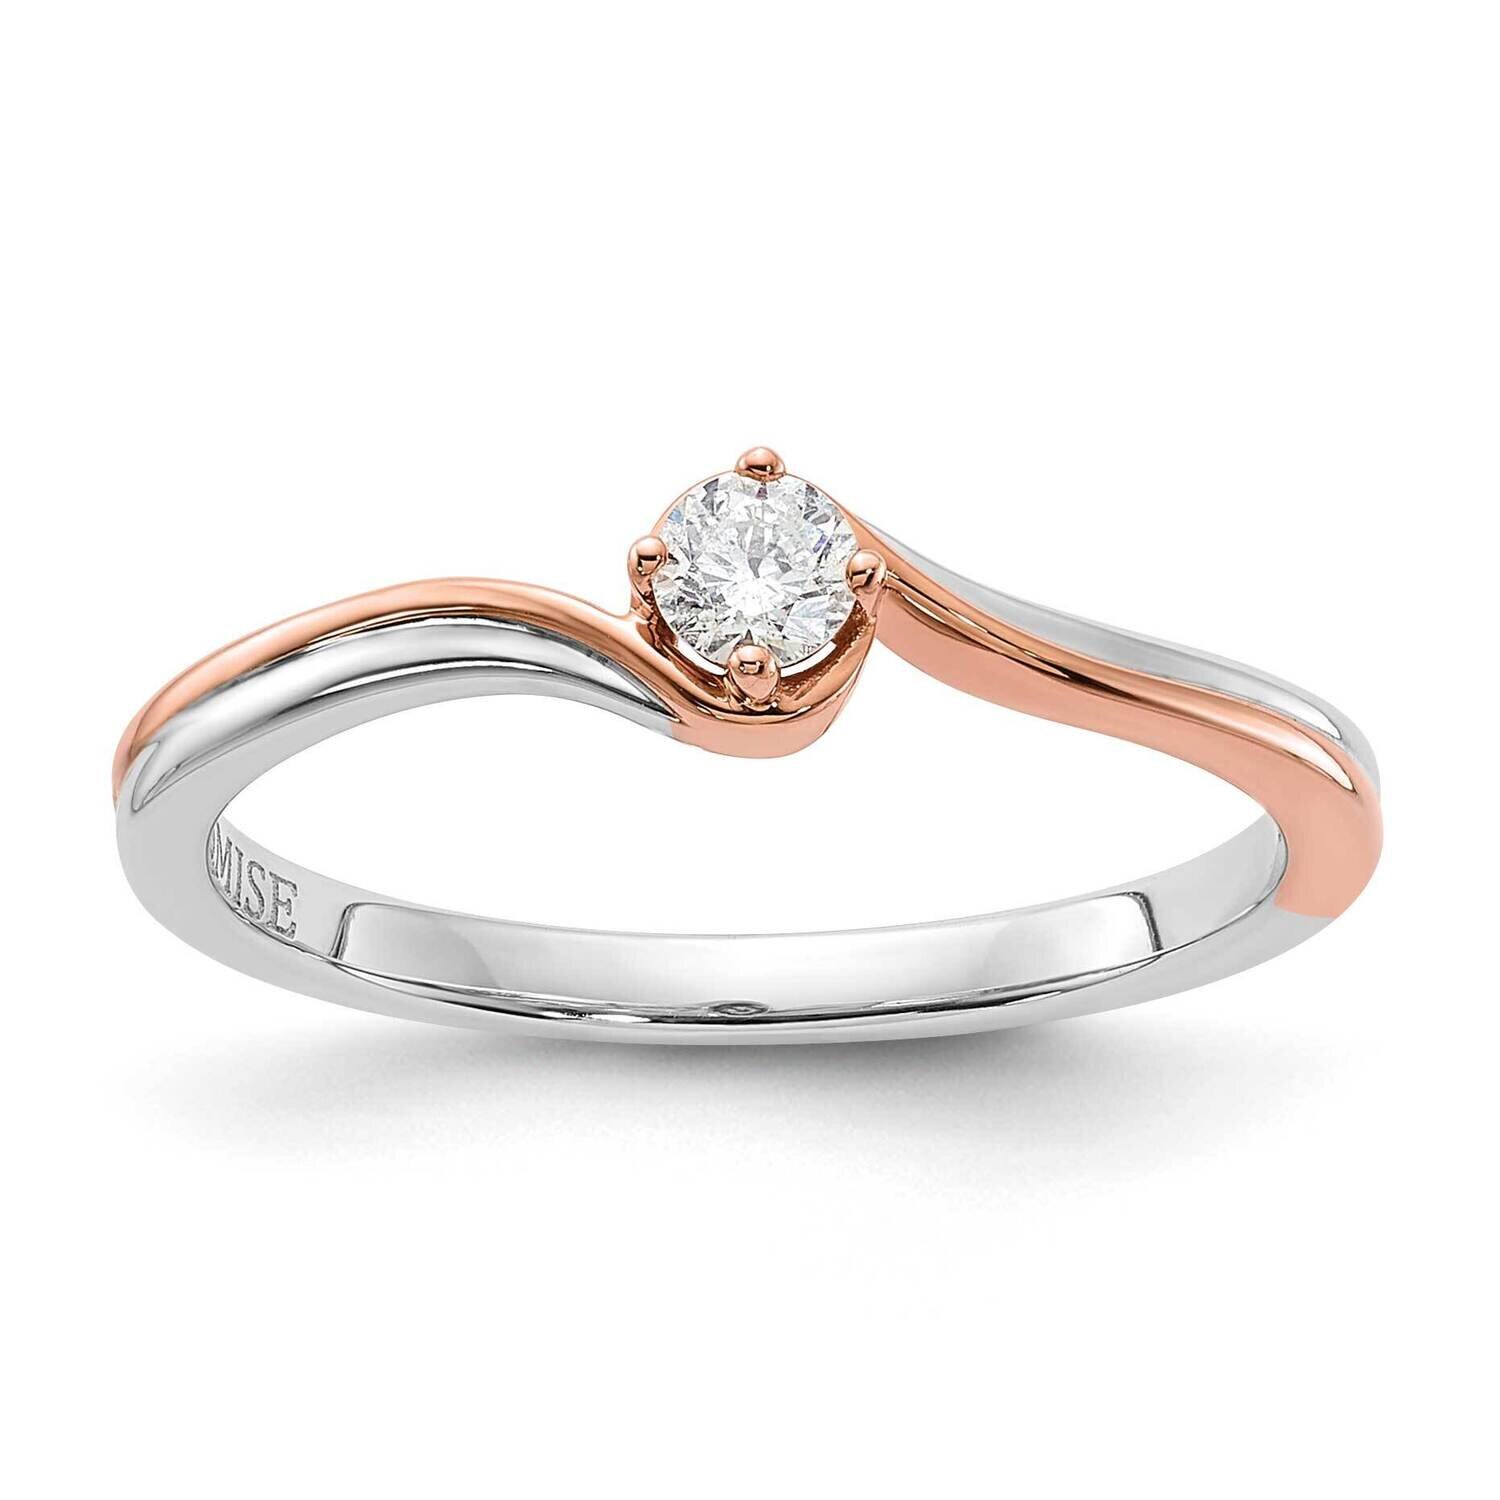 10k Gold White and Rose Gold Polished Diamond Ring RM6493E-012-0WRA